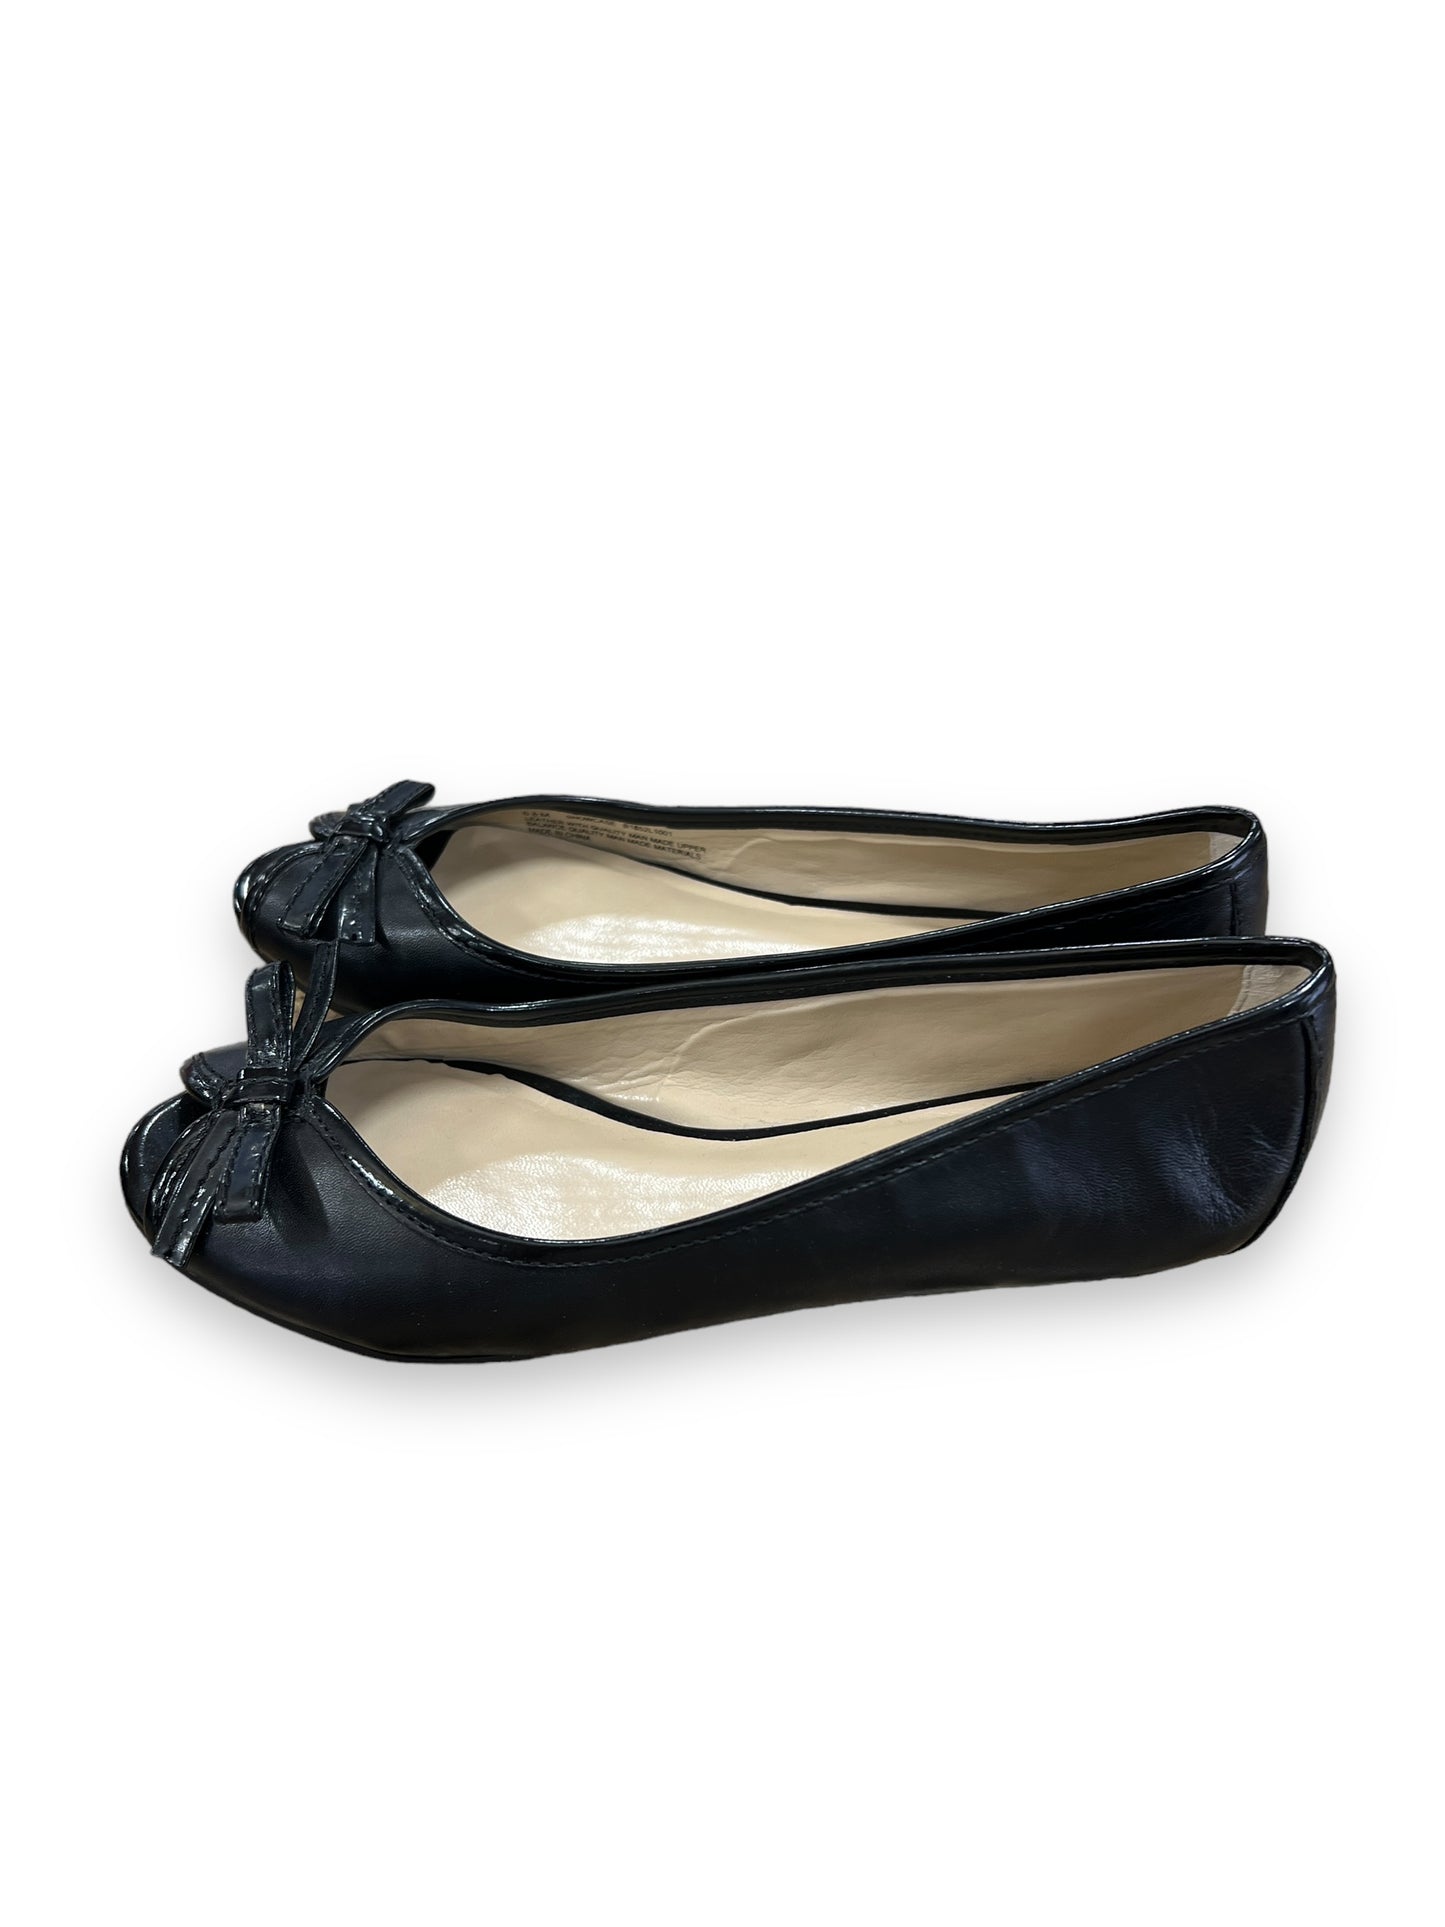 Shoes Flats By Naturalizer  Size: 6.5